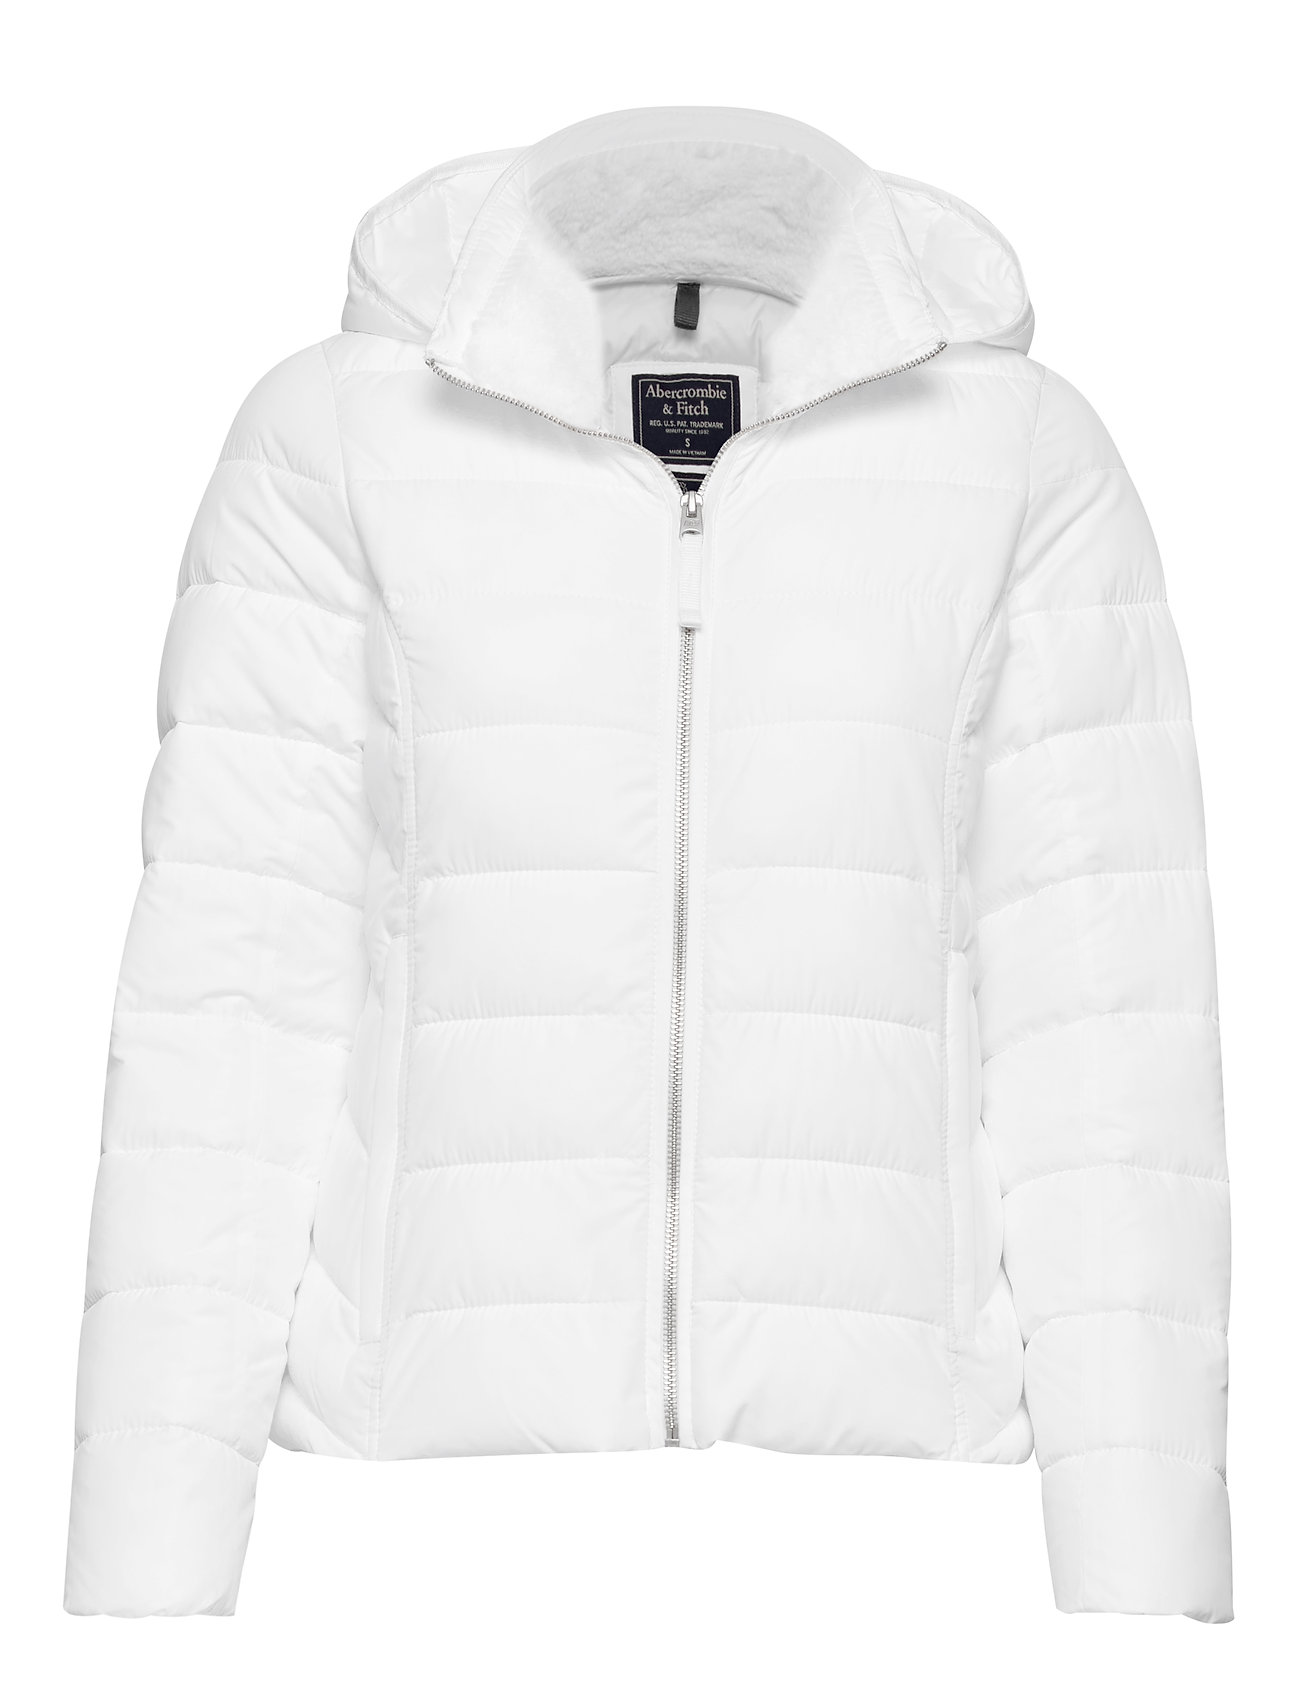 Abercrombie \u0026 Fitch Packable Puffer 